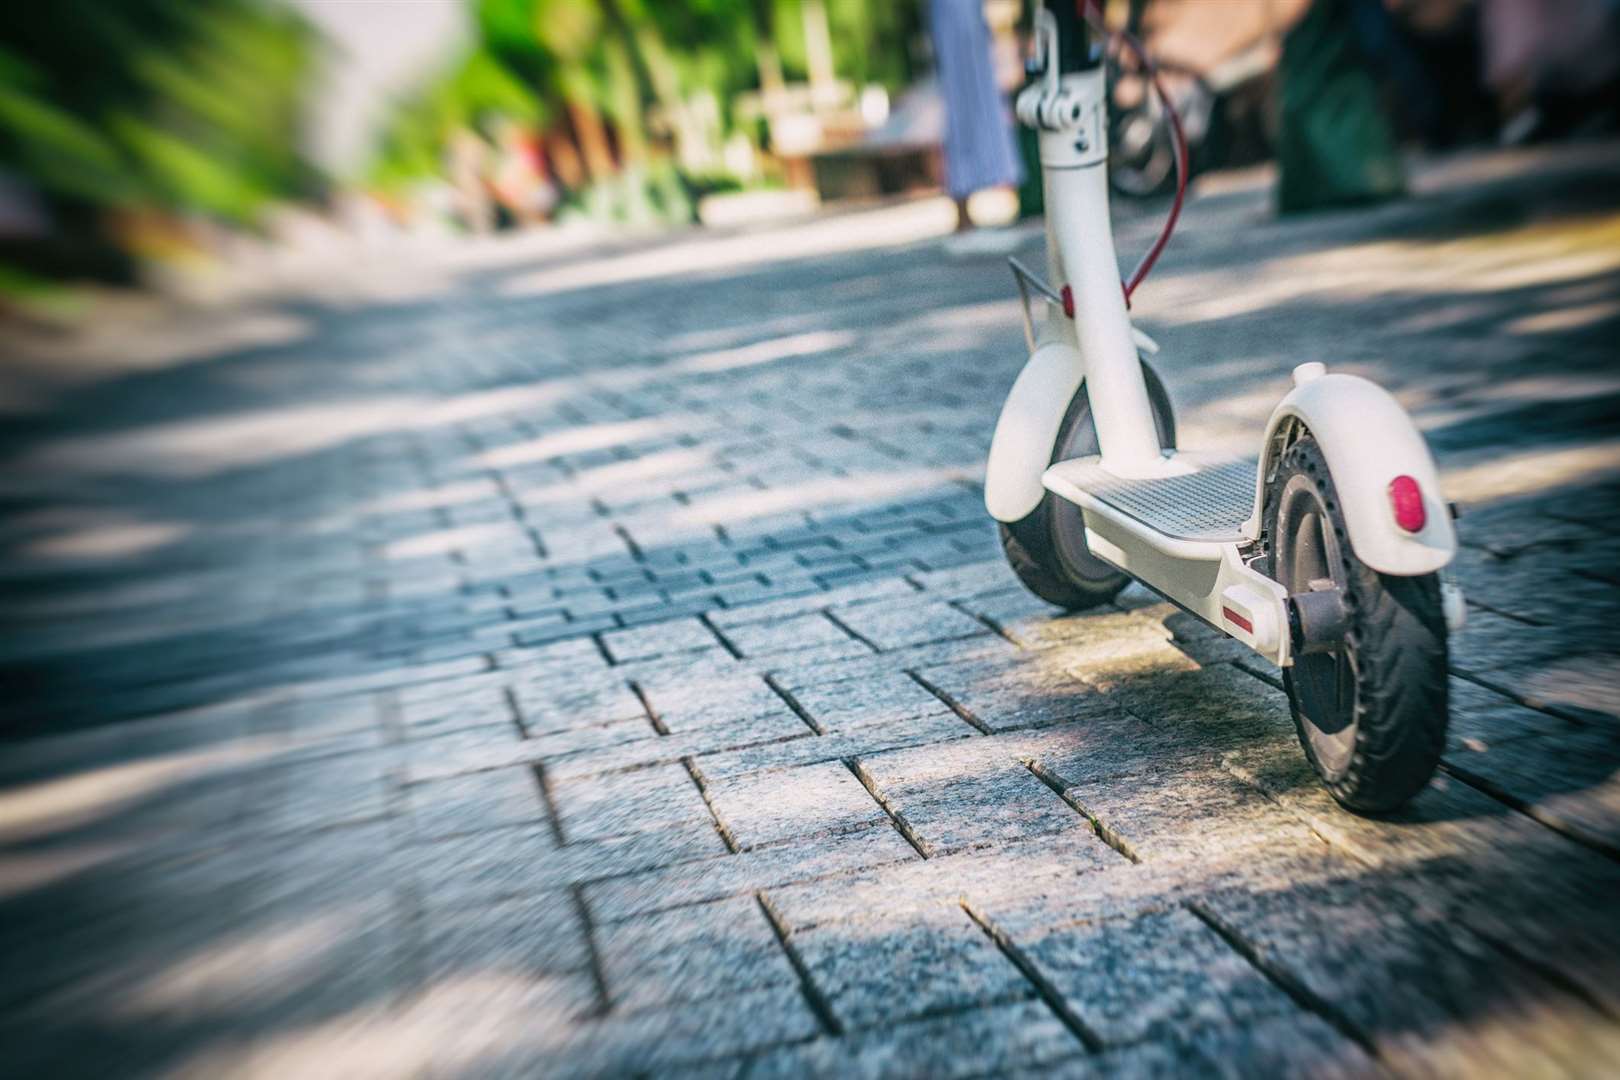 Police are warning users of privately-owned e-scooters to be aware of the law